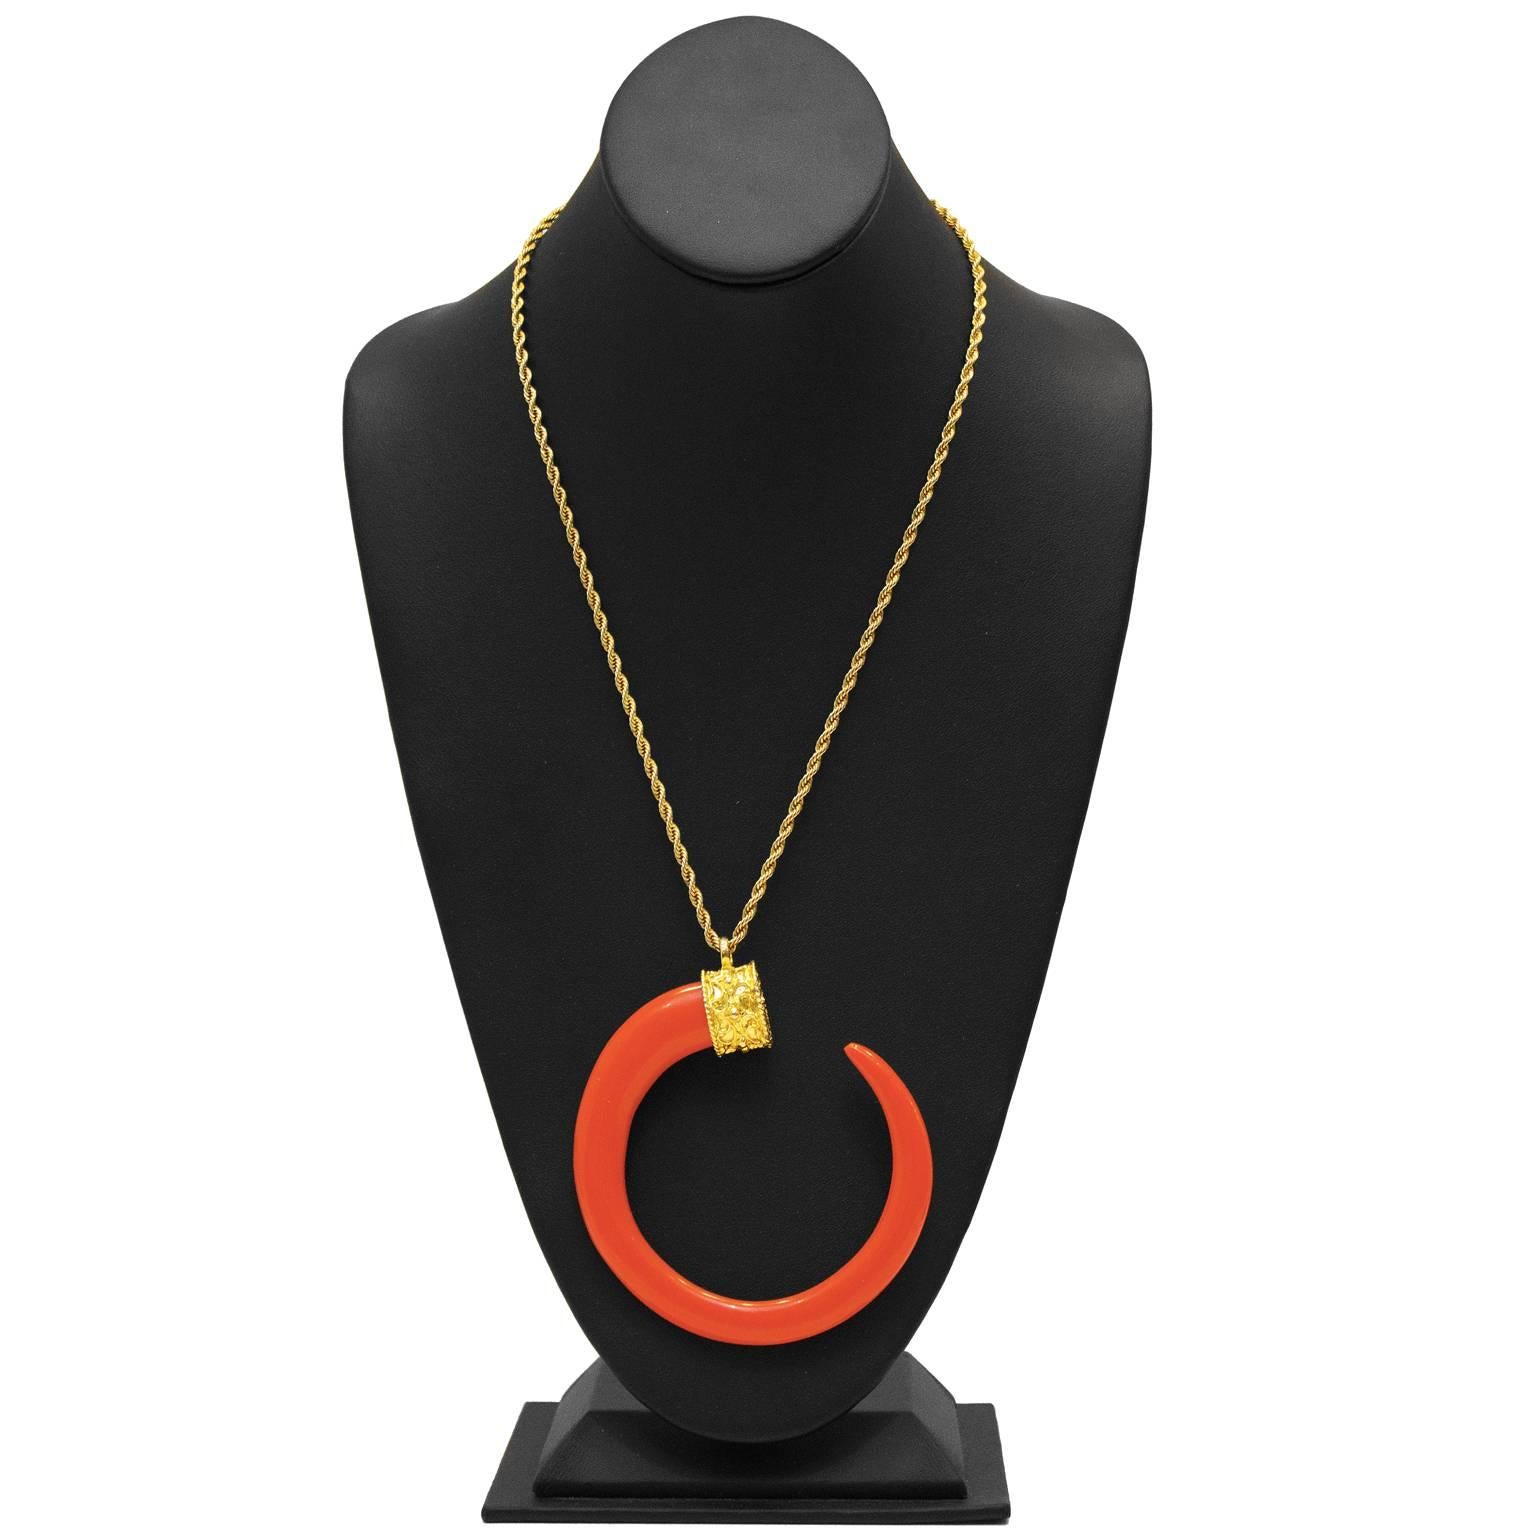 Oversized faux coral curved tusk pendant circa 1970's hanging on mid weight gold plated chain. Dramatic piece. Excellent condition.

Diameter of crescent: 3.5